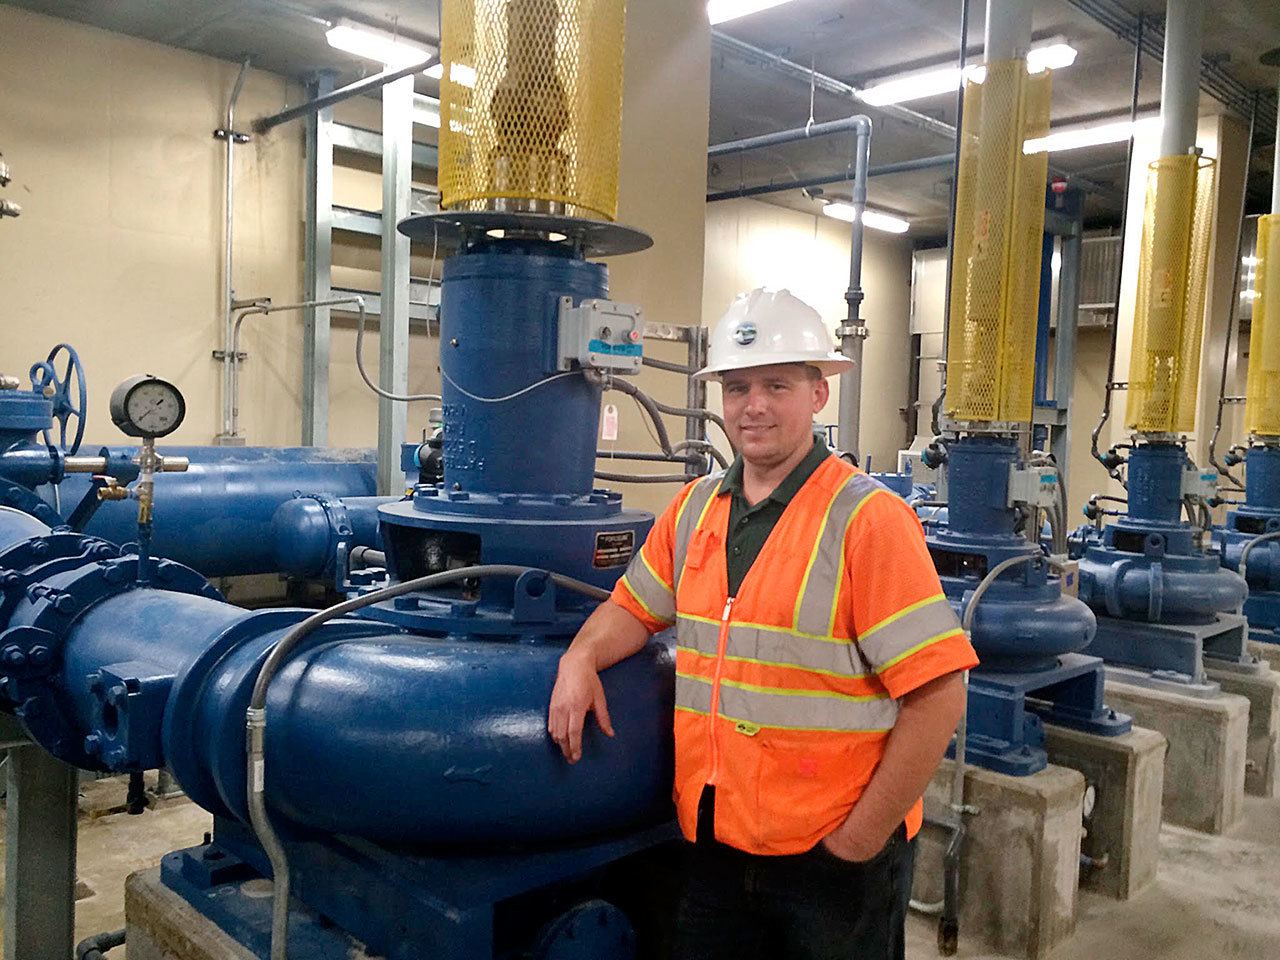 City Civil Engineer Jeff Bender said the new combined sewer overflow pumps can push 28 million gallons of sewage a day to the city’s treatment plant. (Paul Gottlieb/Peninsula Daily News)